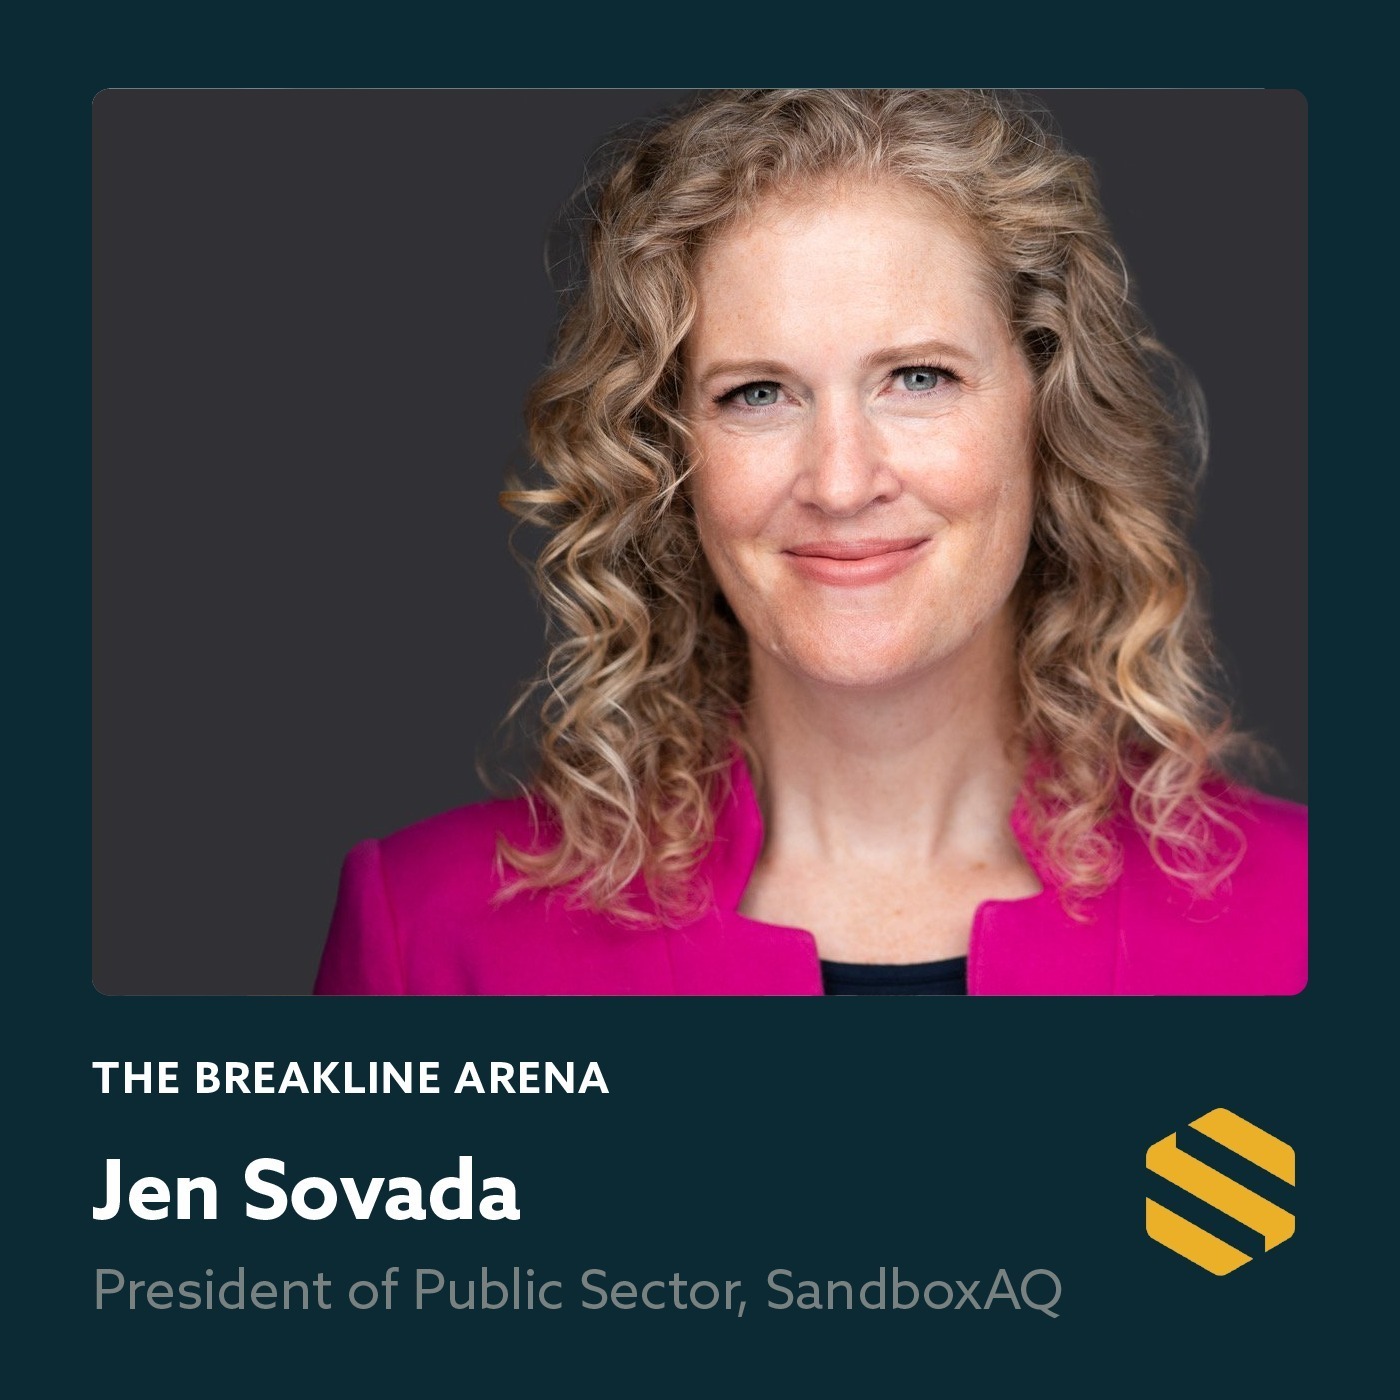 Jen Sovada, President of Public Sector at SandboxAQ | Creating a Learn, Grow, and Build Mindset